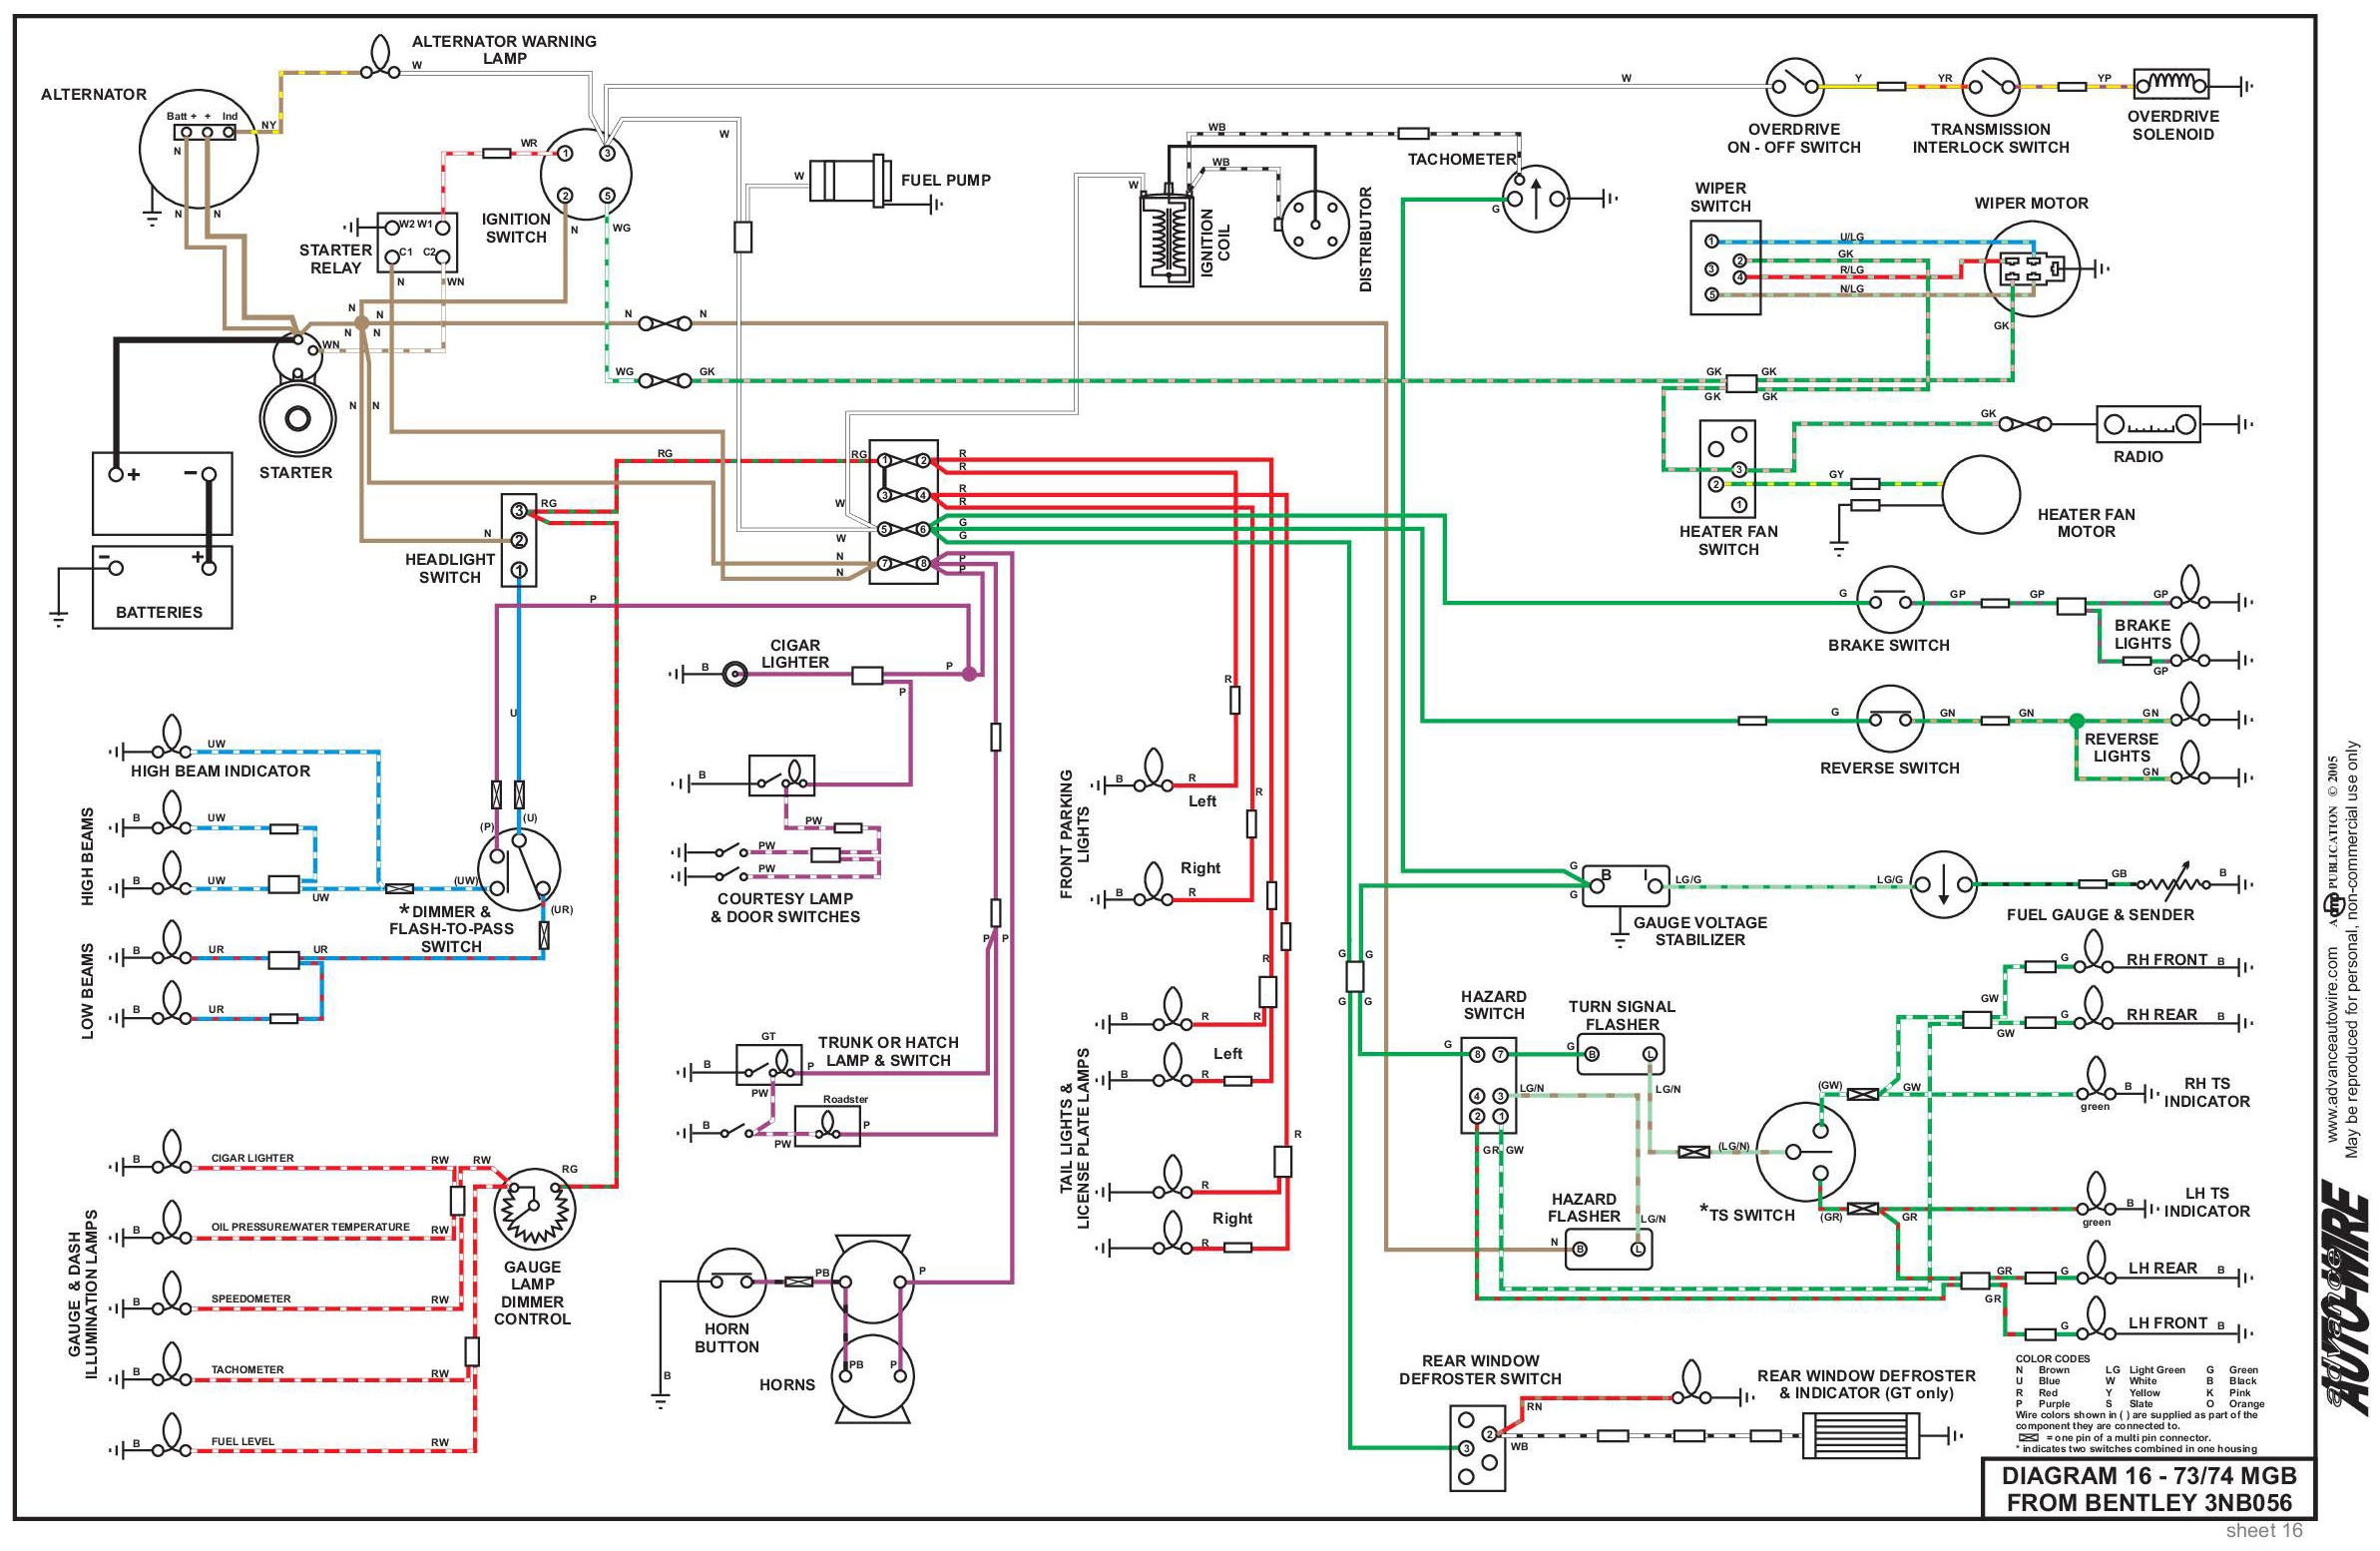 Start Stop Push Button Wiring Diagram Single Phase Awesome